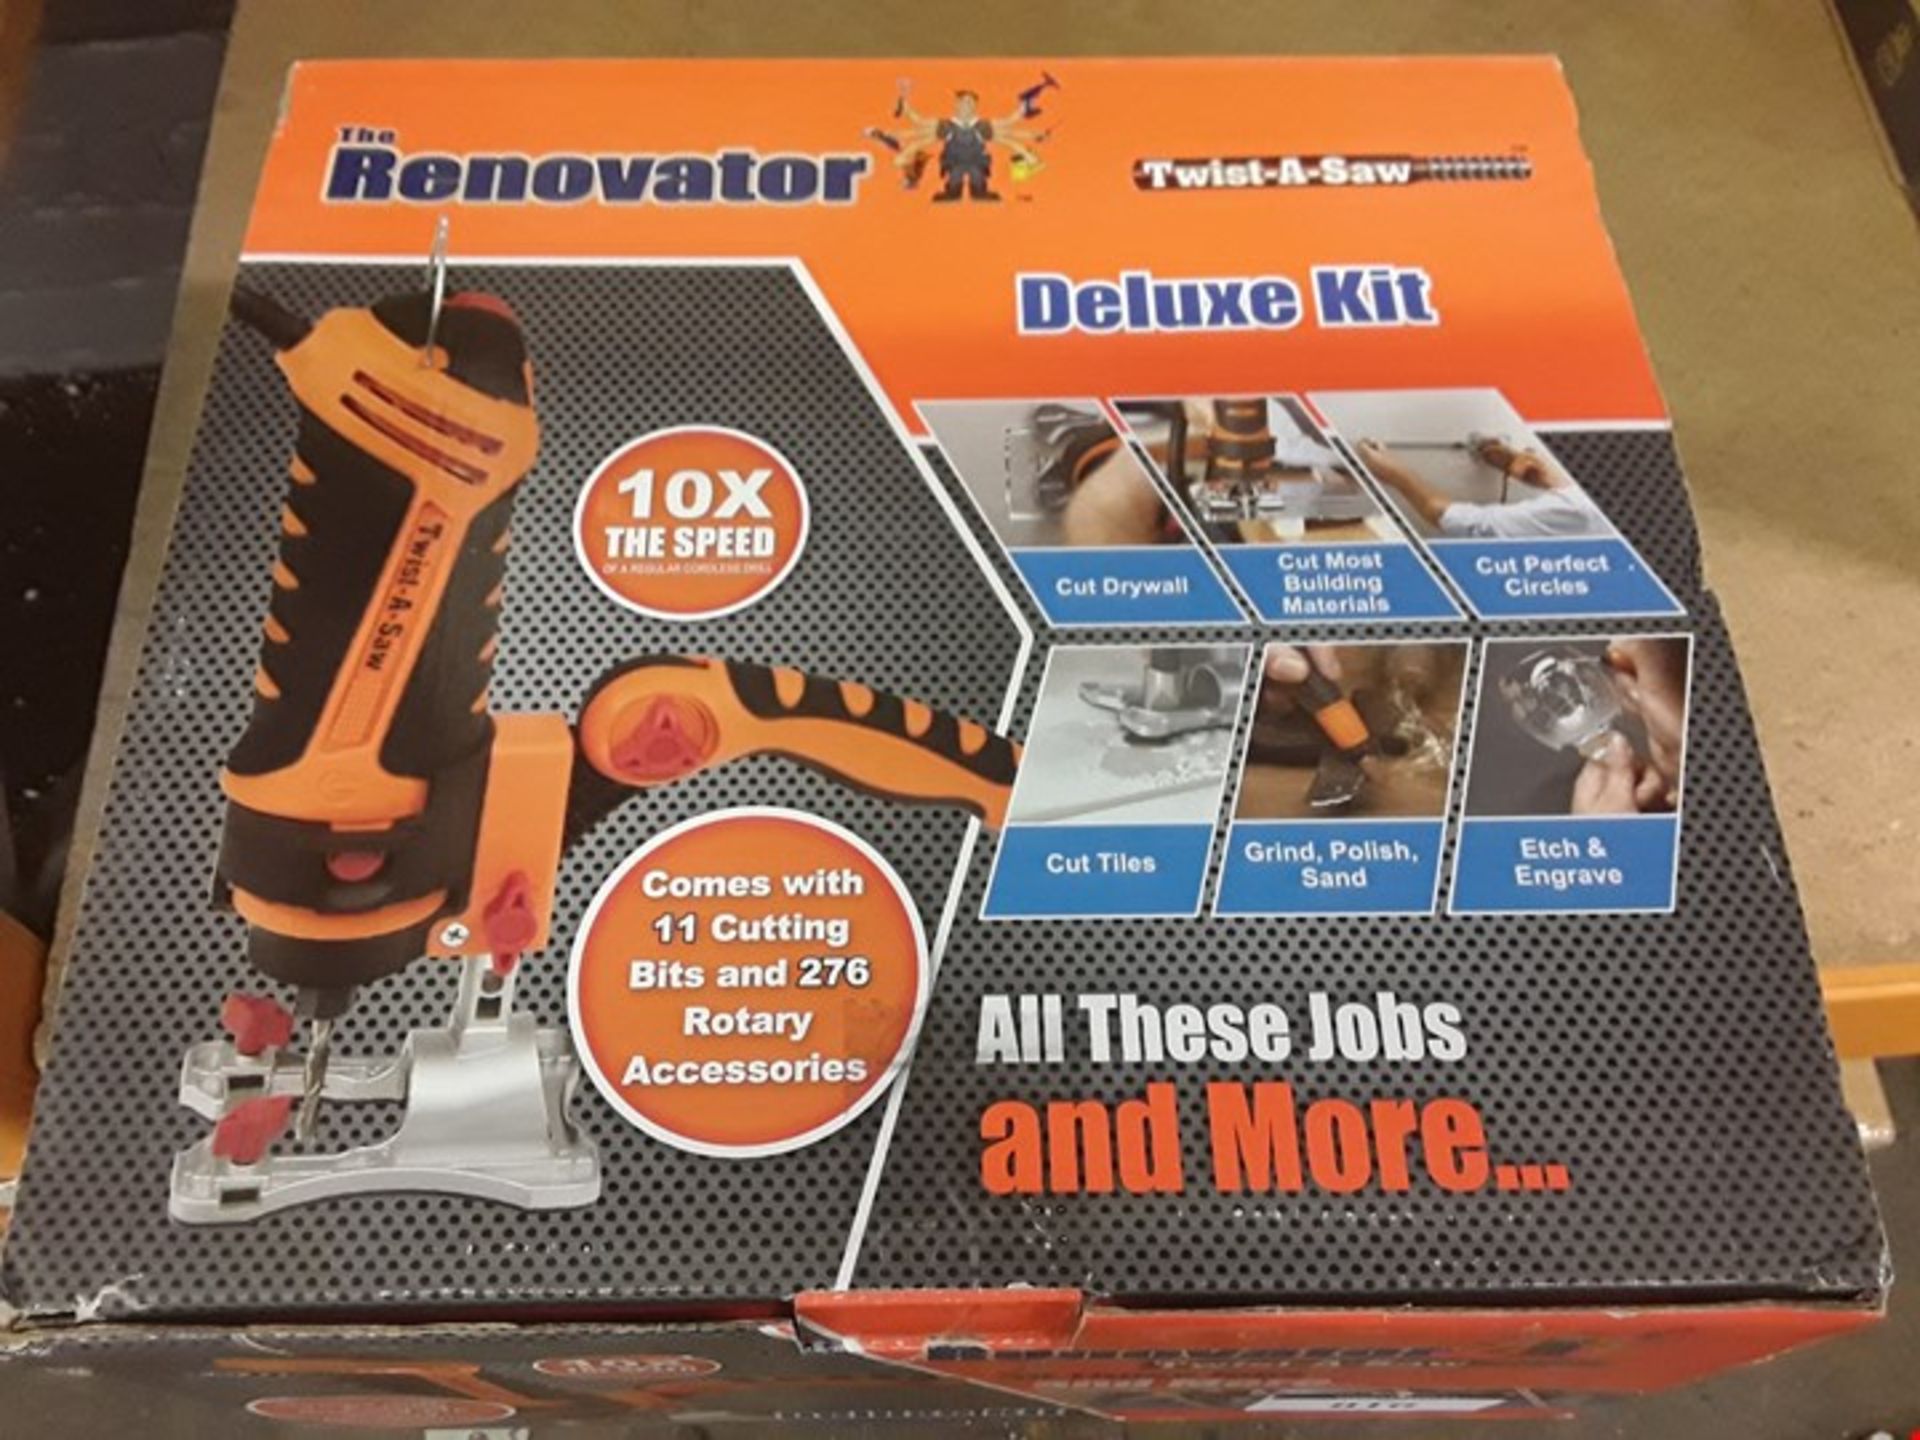 BOXED THE RENOVATOR TWIST-A-SAW DELUXE KIT.